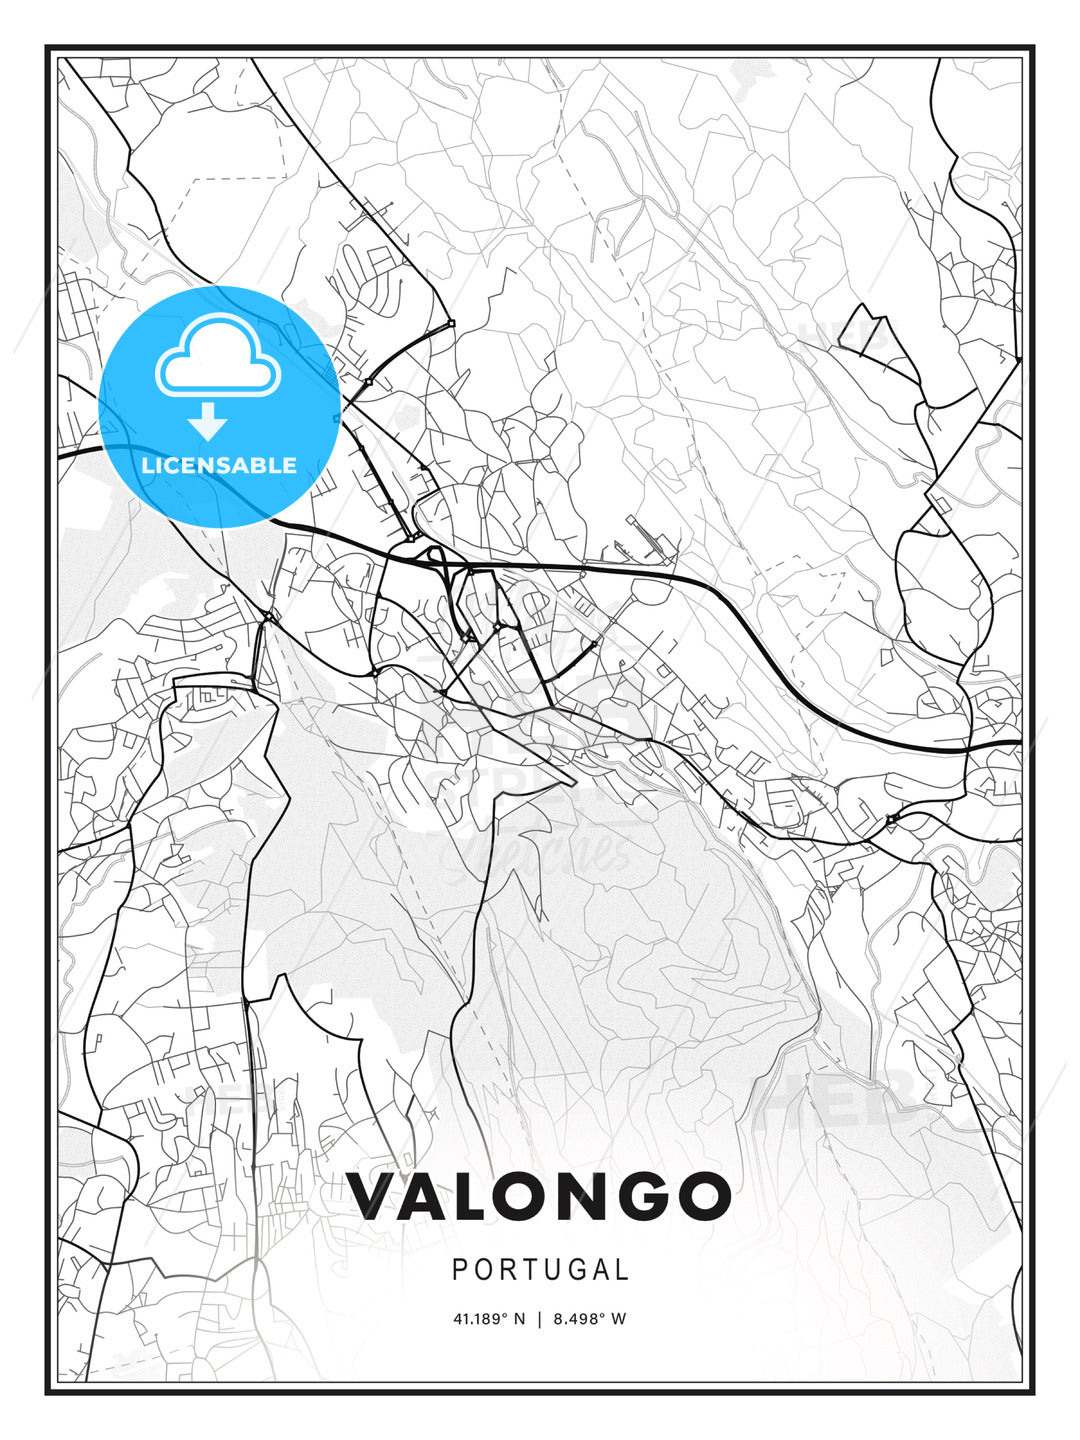 Valongo, Portugal, Modern Print Template in Various Formats - HEBSTREITS Sketches